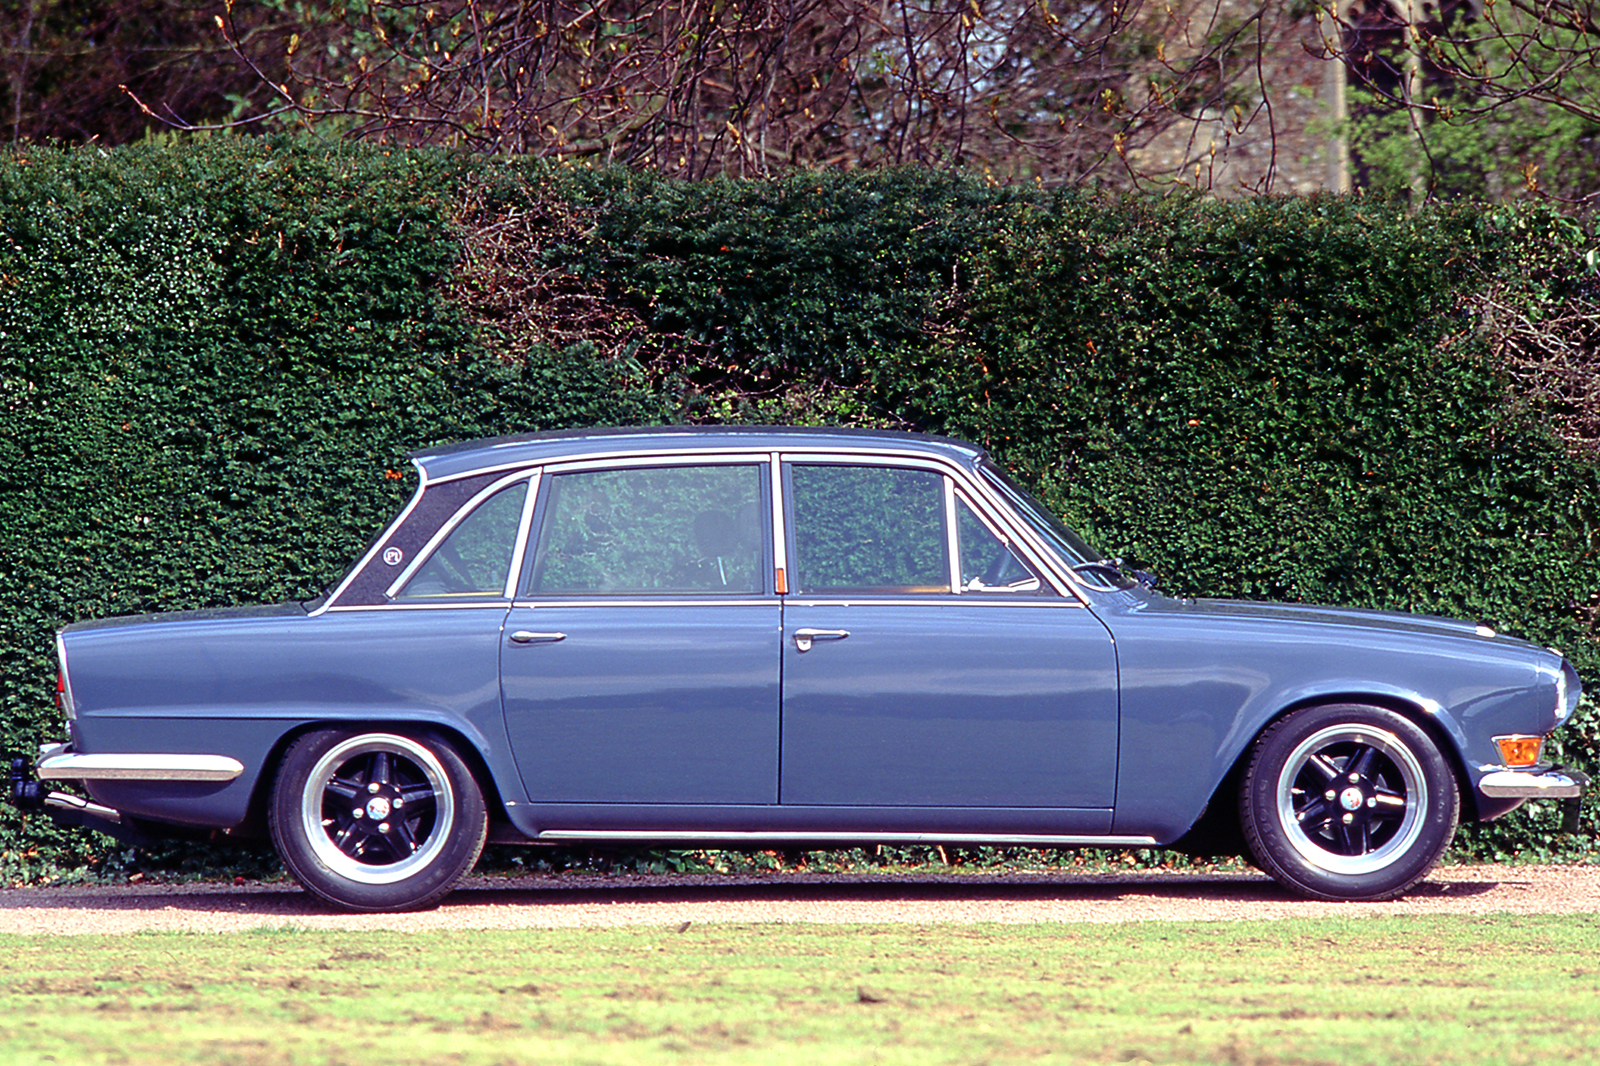 Yes, British Leyland did actually make some great cars